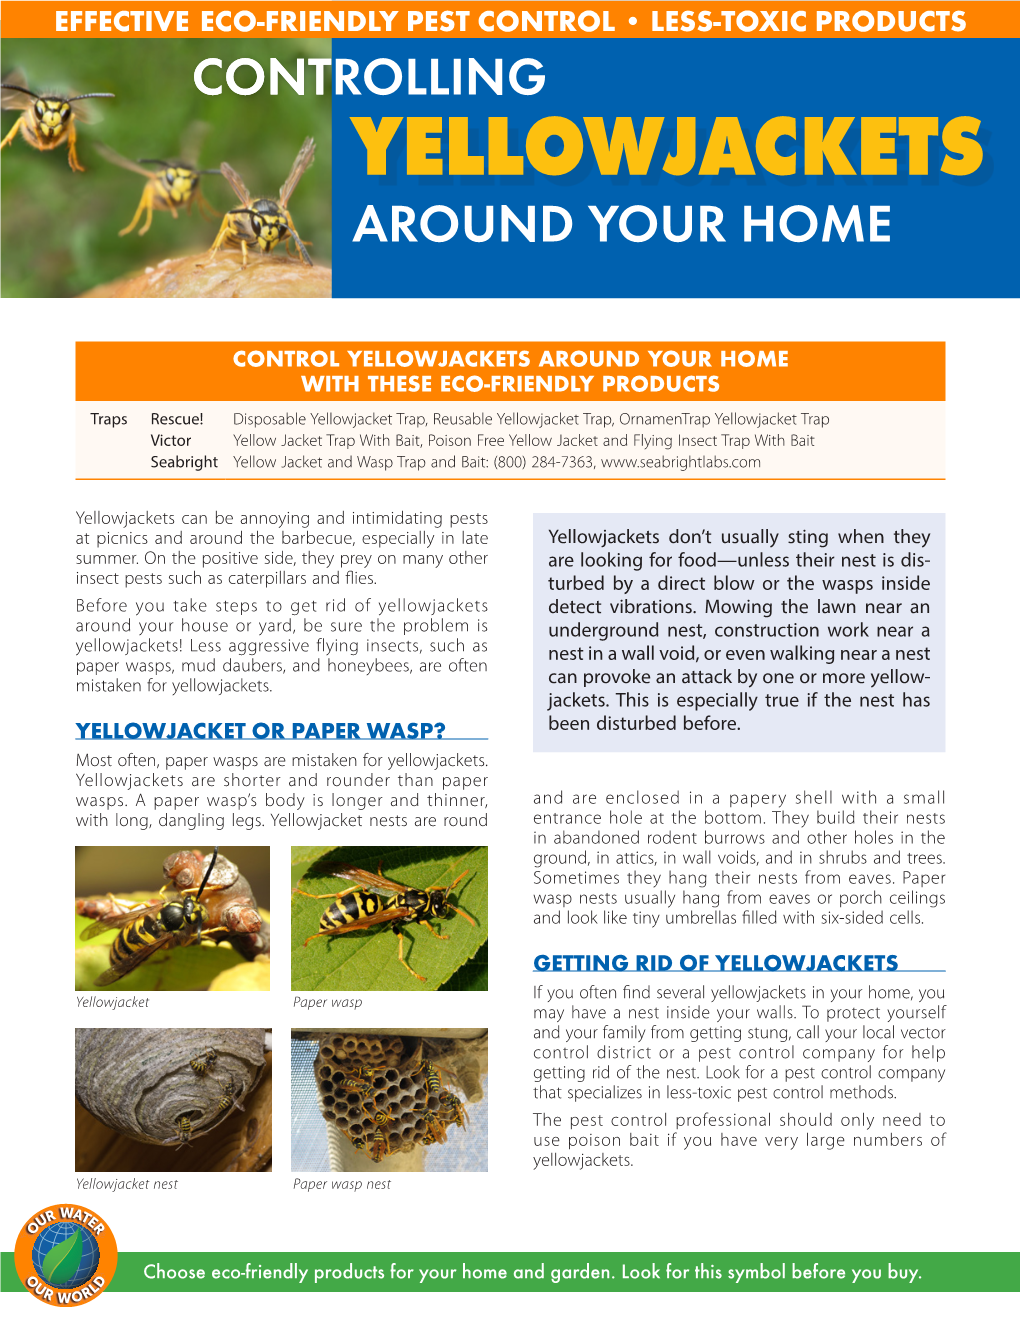 Yellowjackets Around Your Home